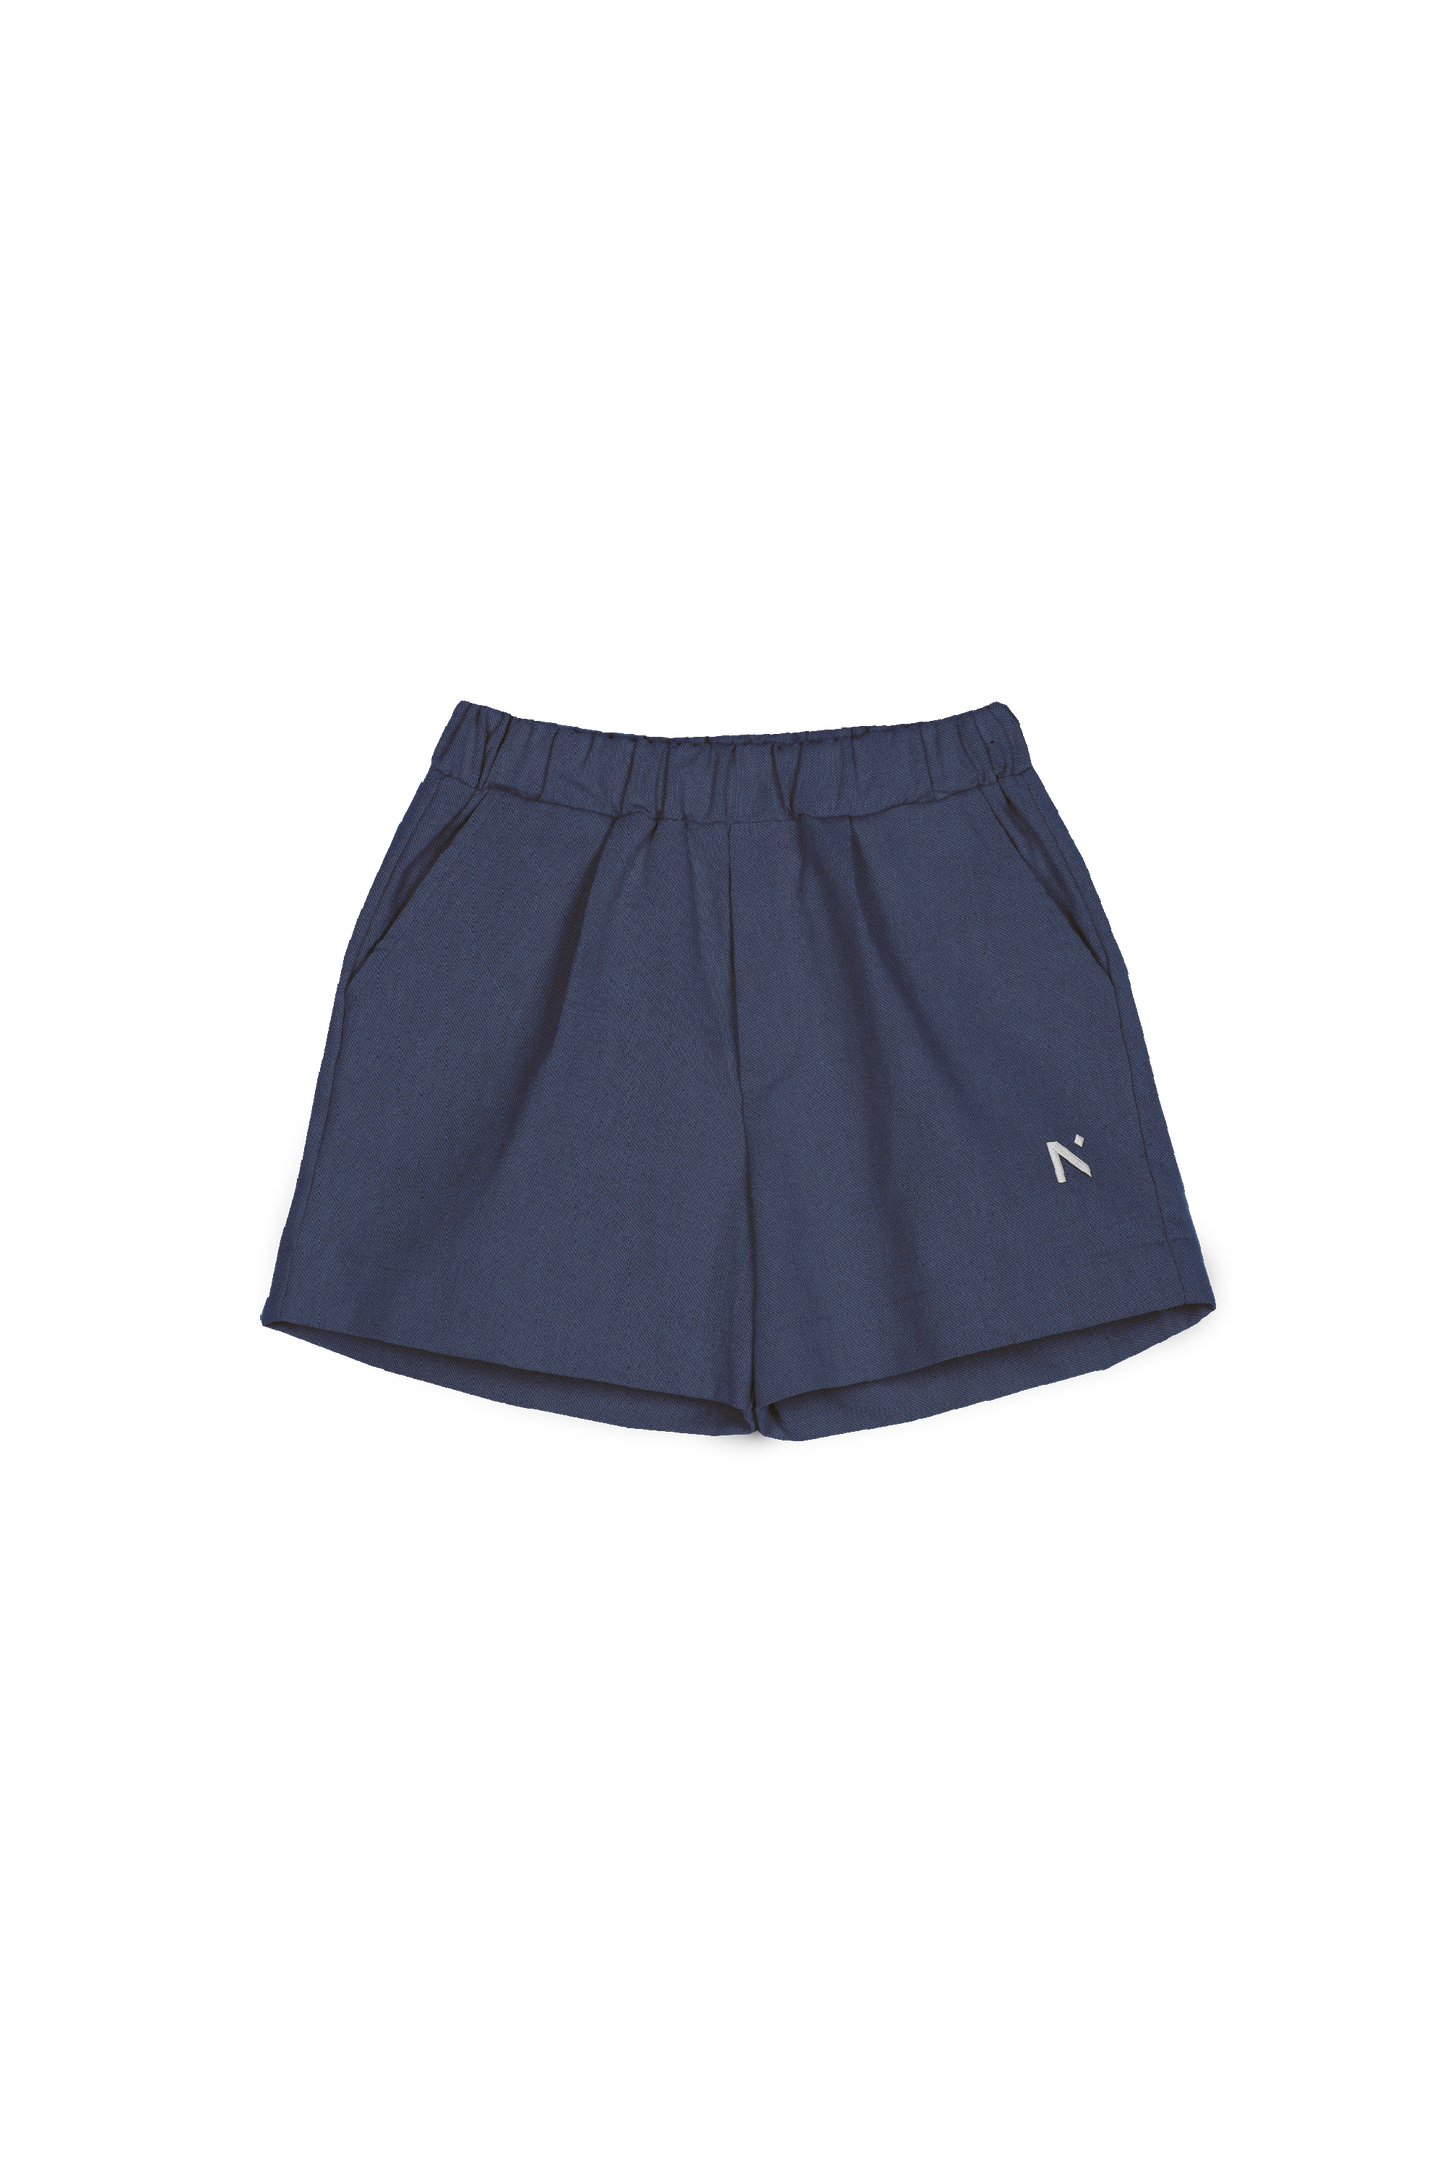 Mipounet Pleated Short